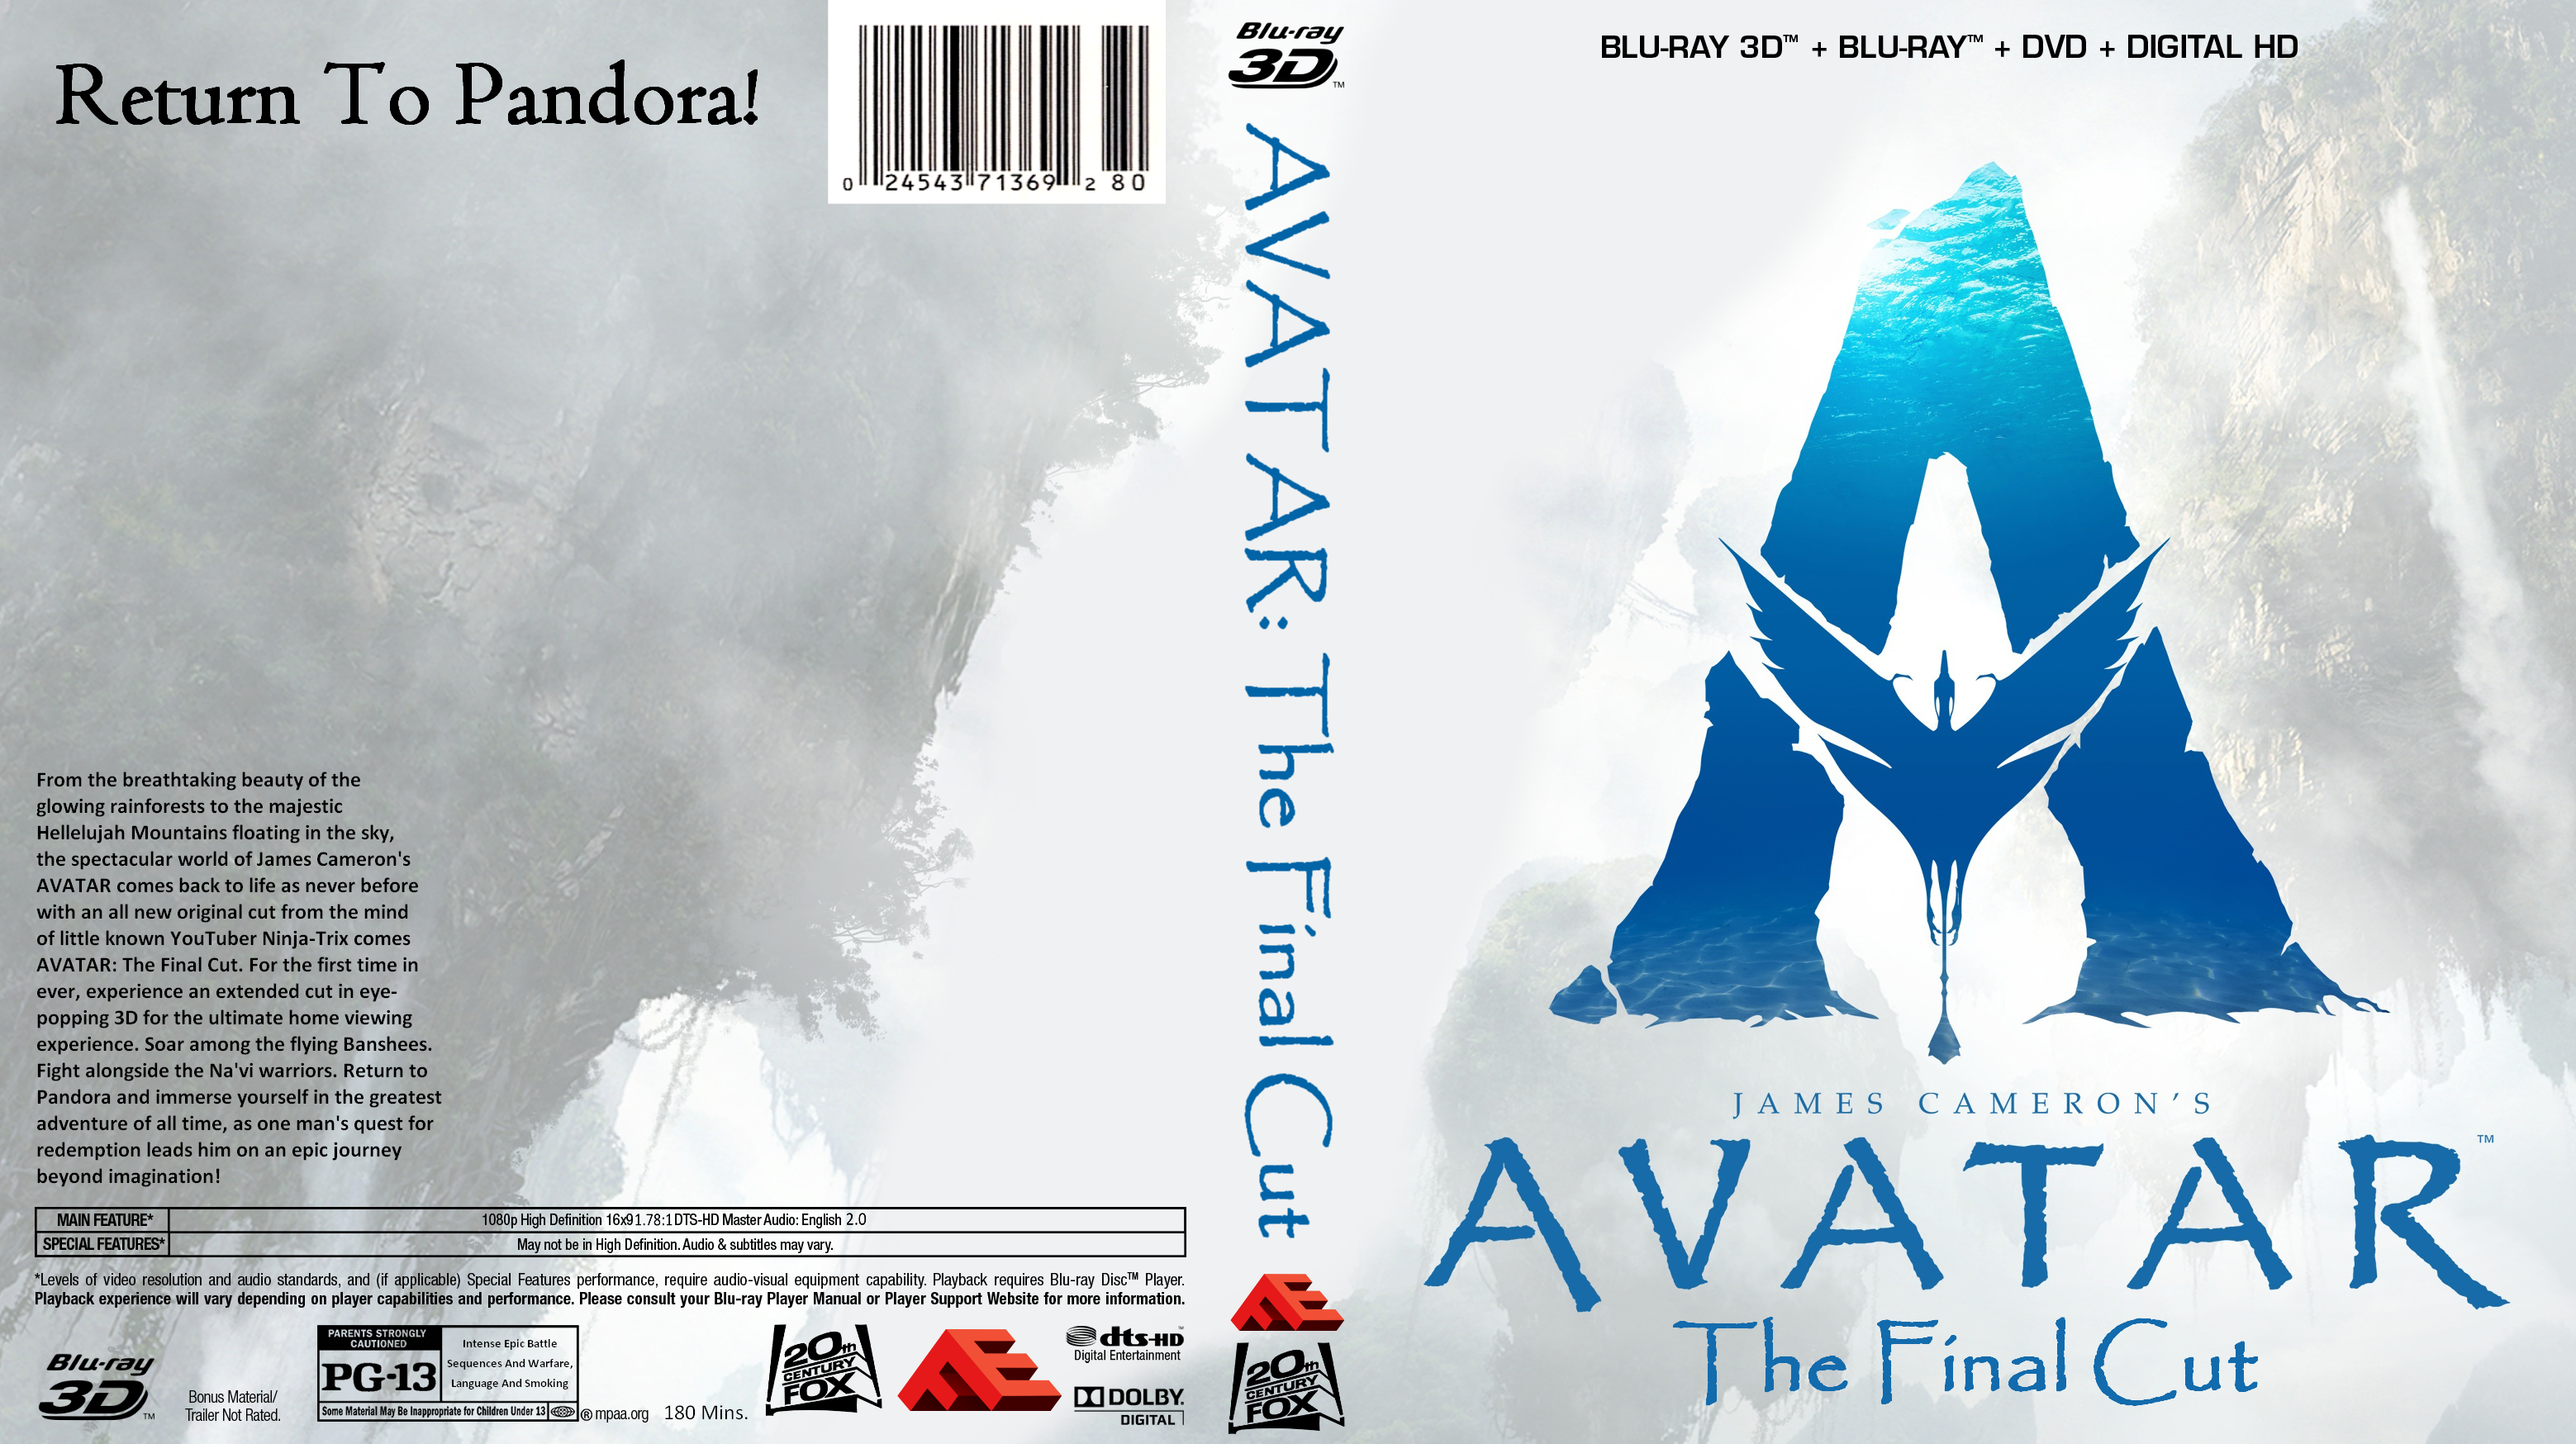 3D The Final Cut Blu-Ray.png | Fanedit.org Forums